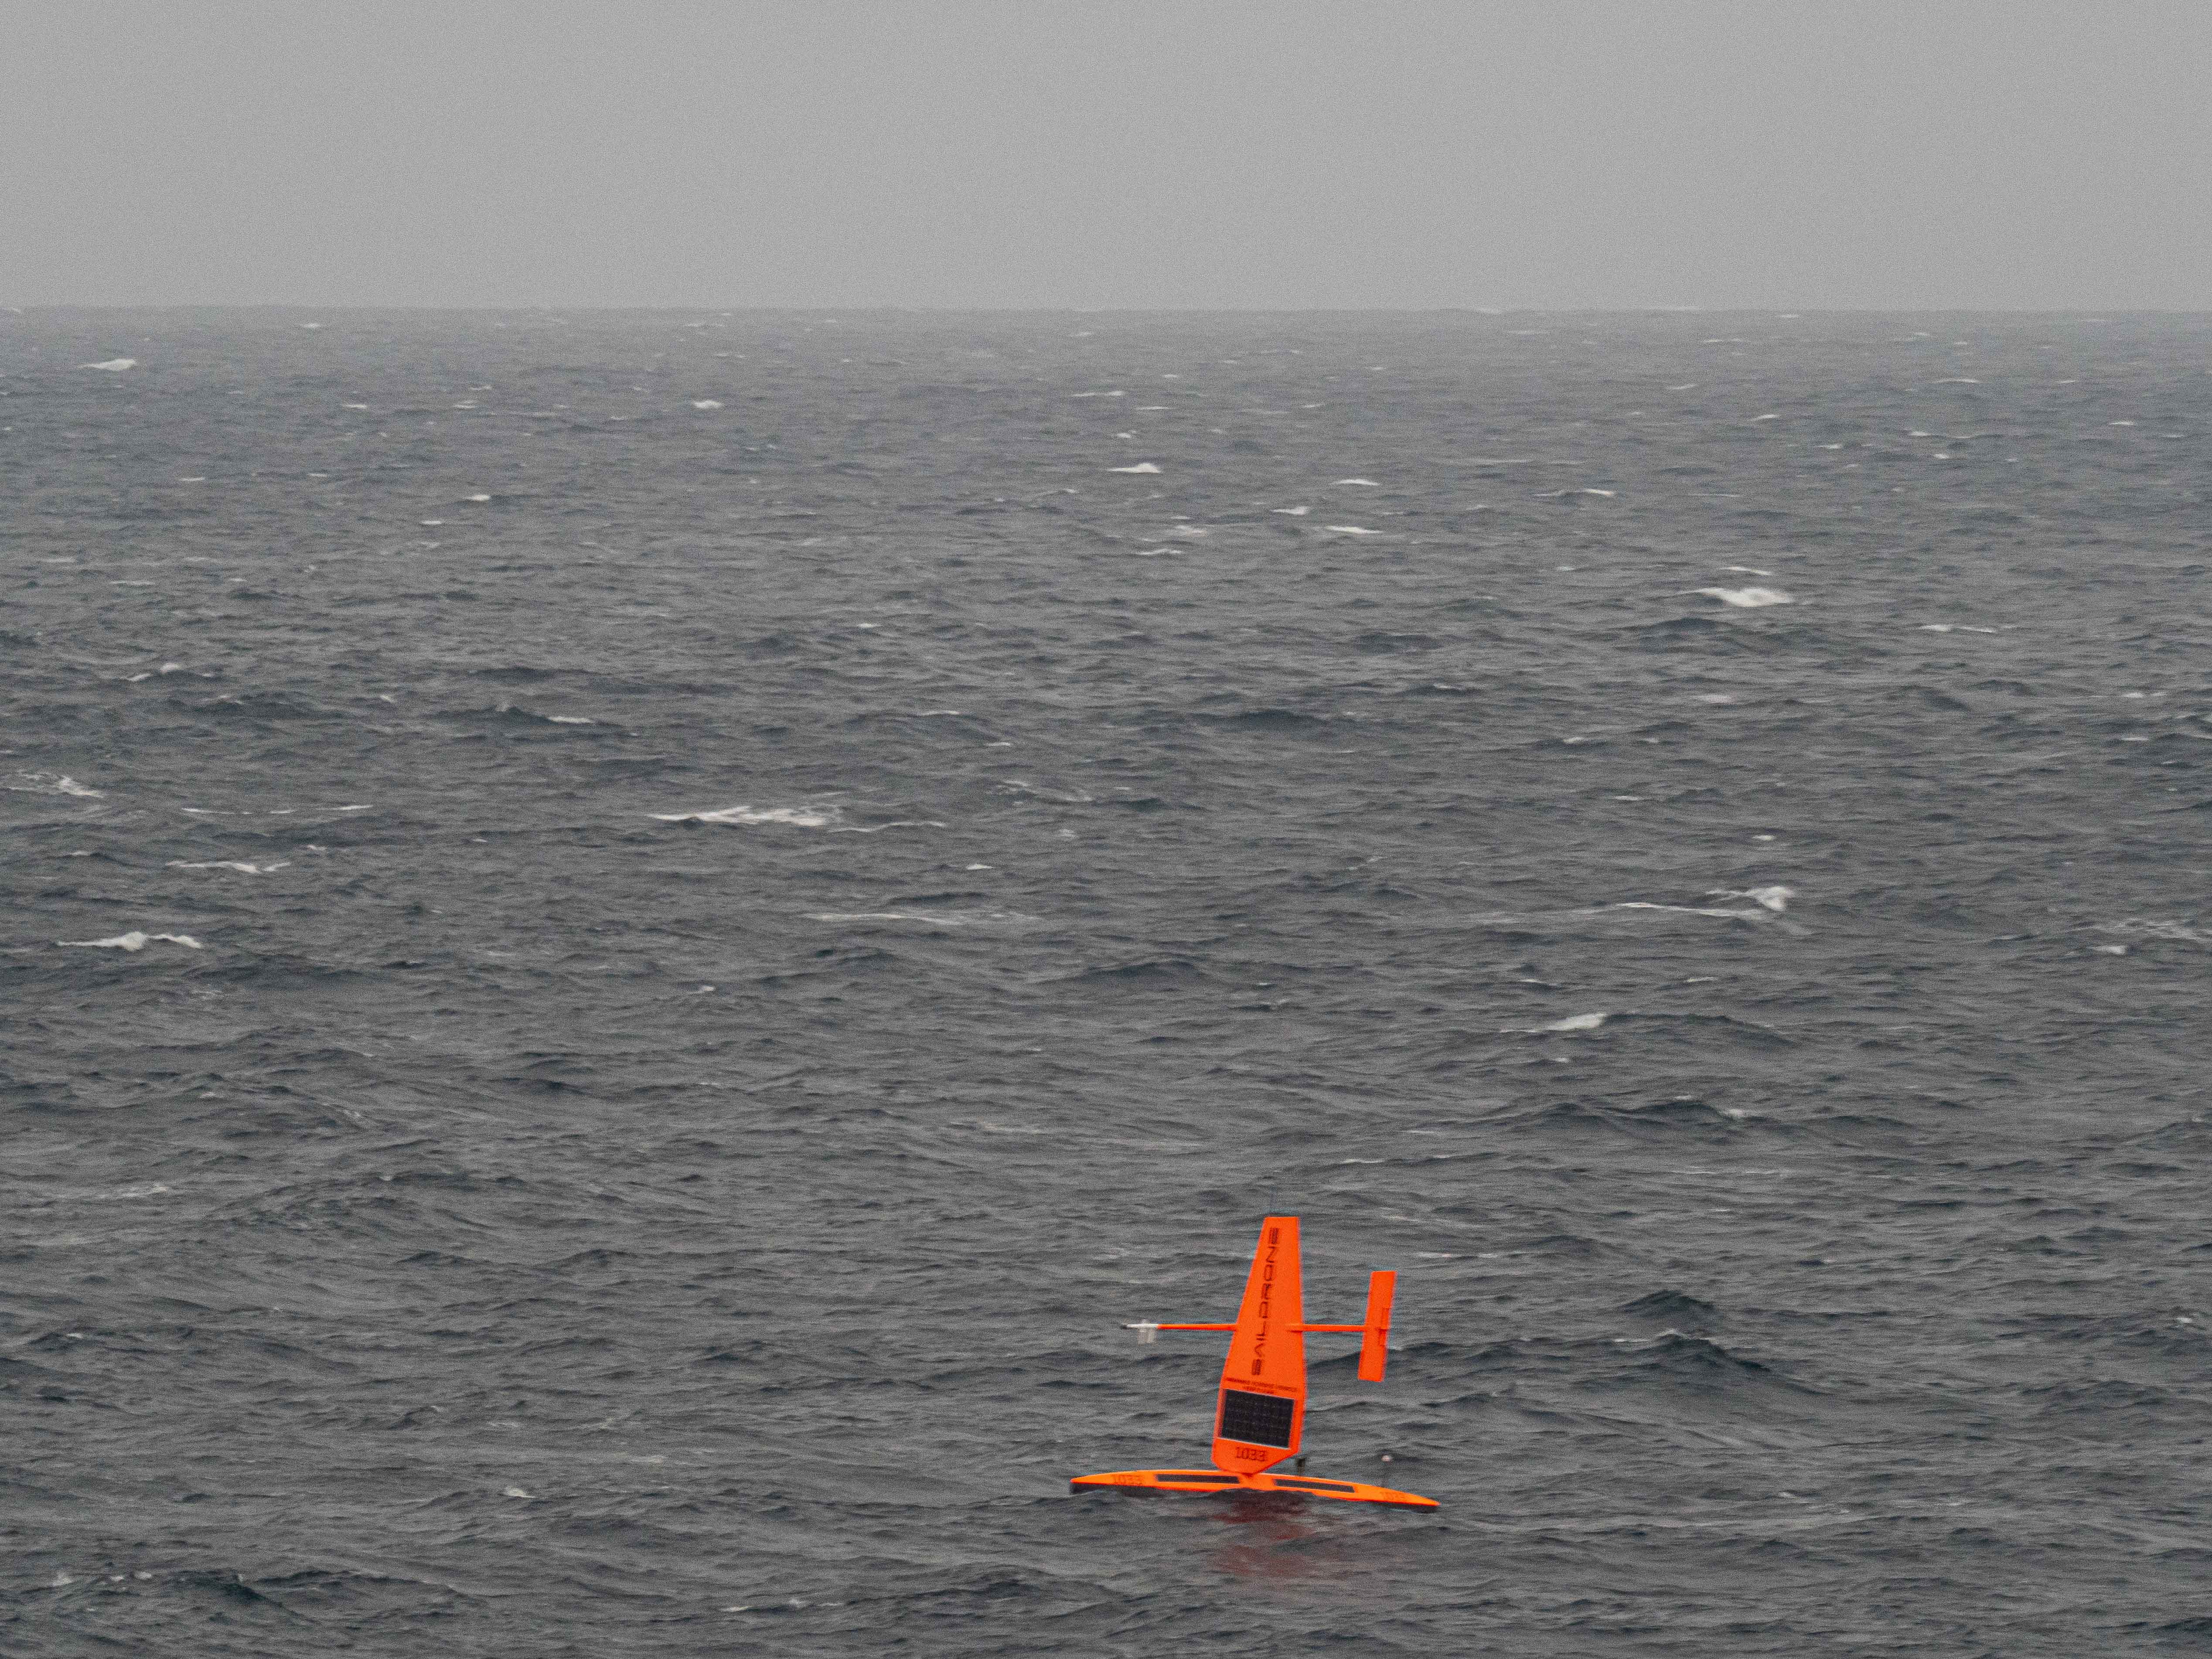 A saildrone observed at sea in the Arctic during the 2019 NOAA Arctic missions